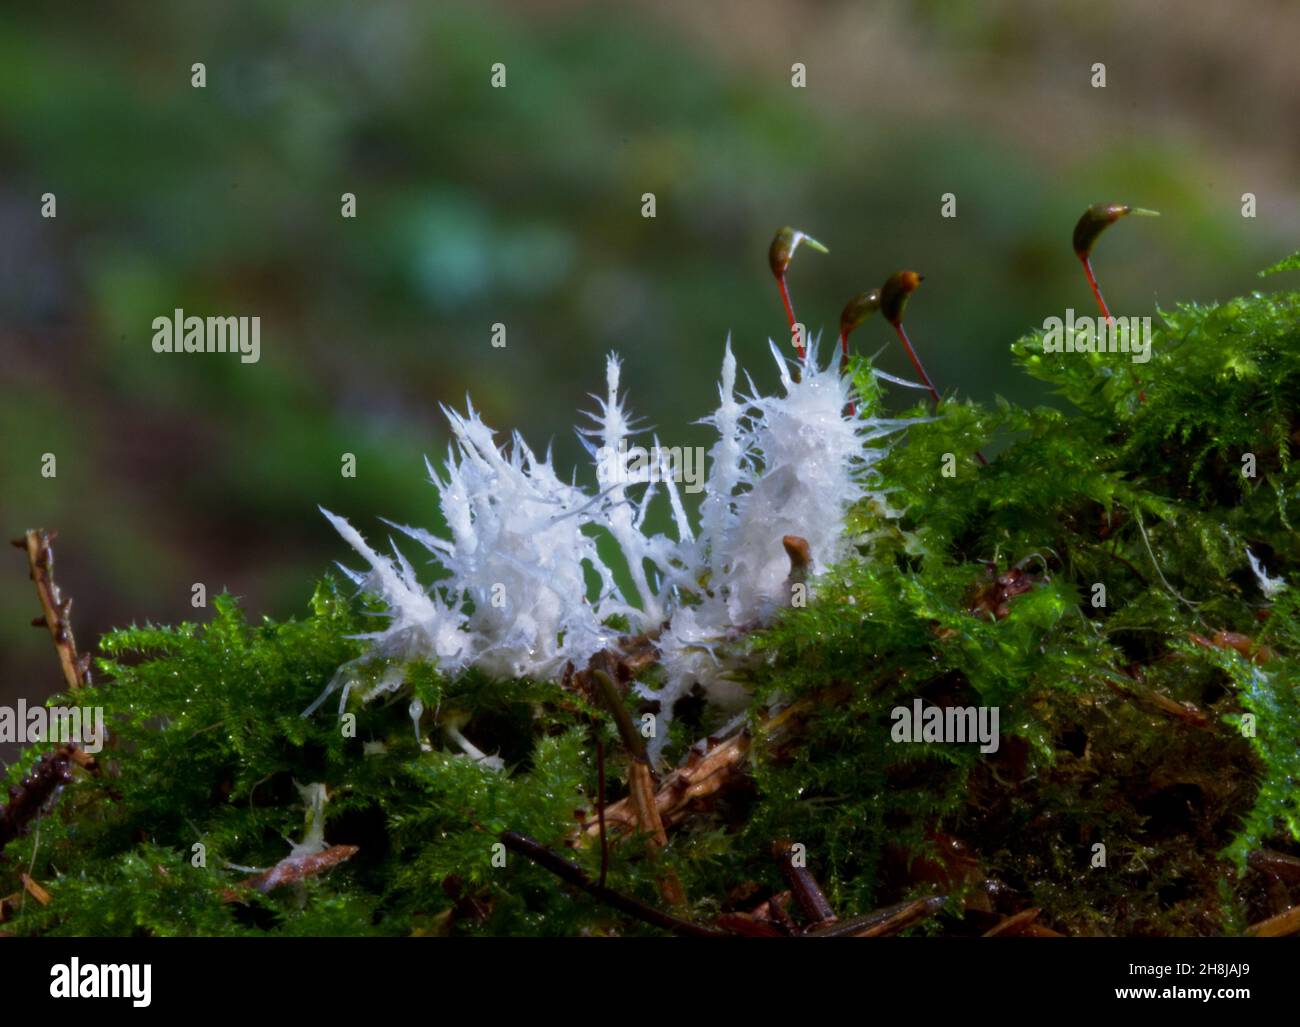 White, very small icicle-like structures in moss, mycelium of a mushroom, called ozonium, sterile fungal hyphae Stock Photo